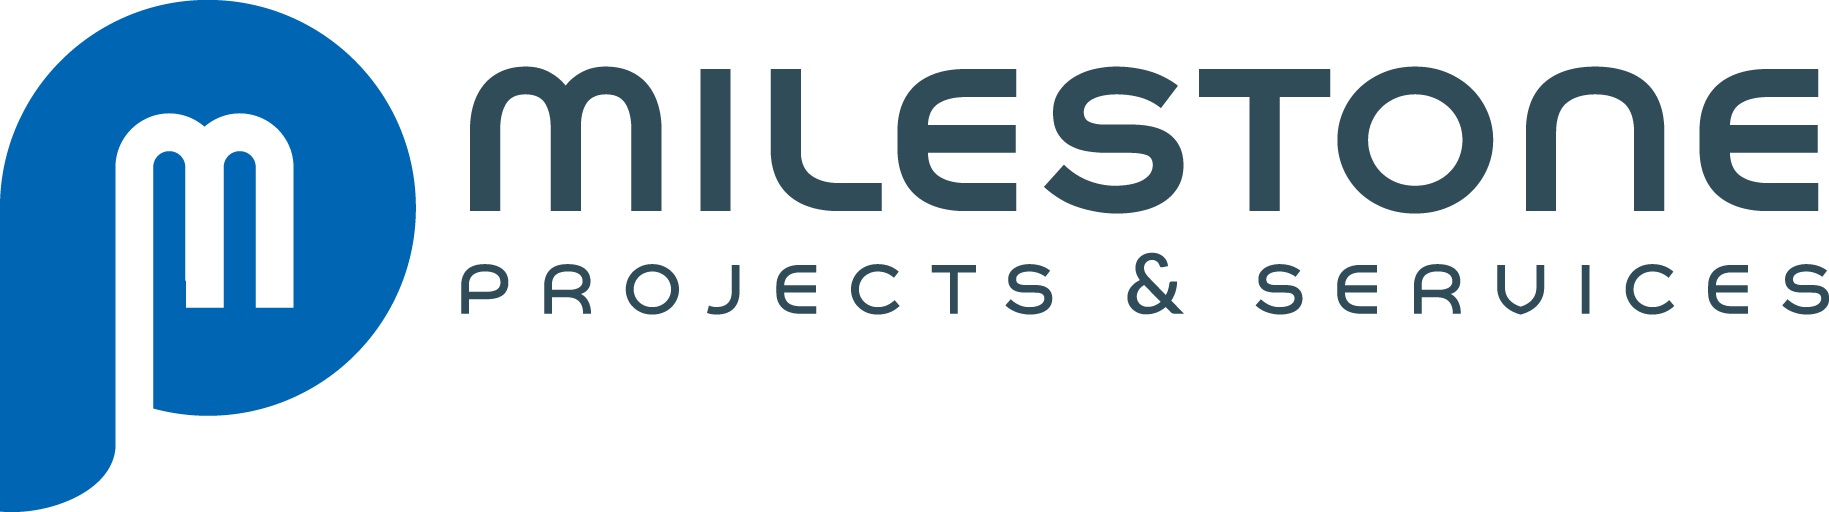 Milestone Projects & Services